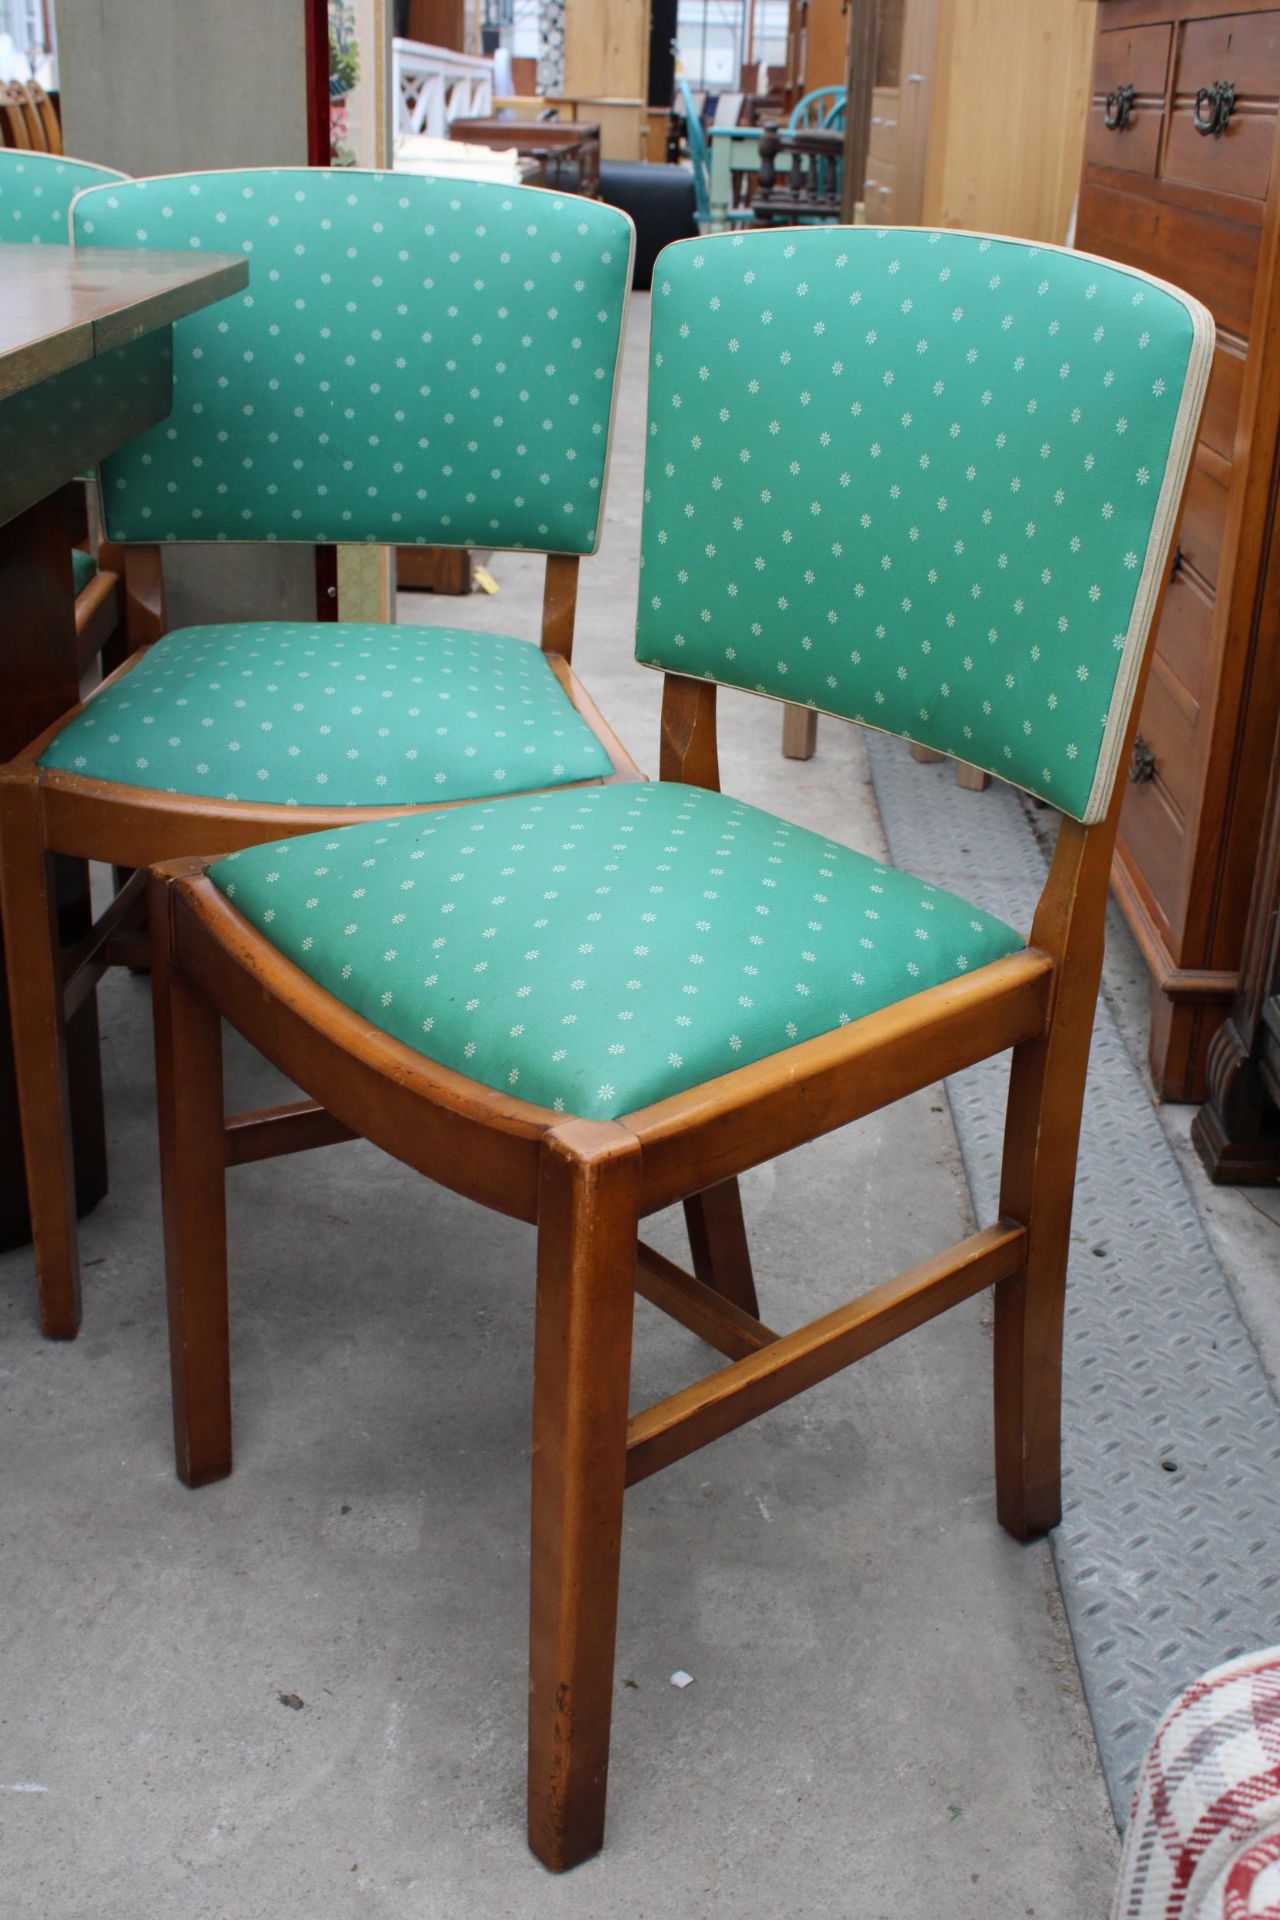 A MID 20TH CENTURY WALNUT EXTENDING DINING TABLE AND FOUR CHAIRS - Image 3 of 3